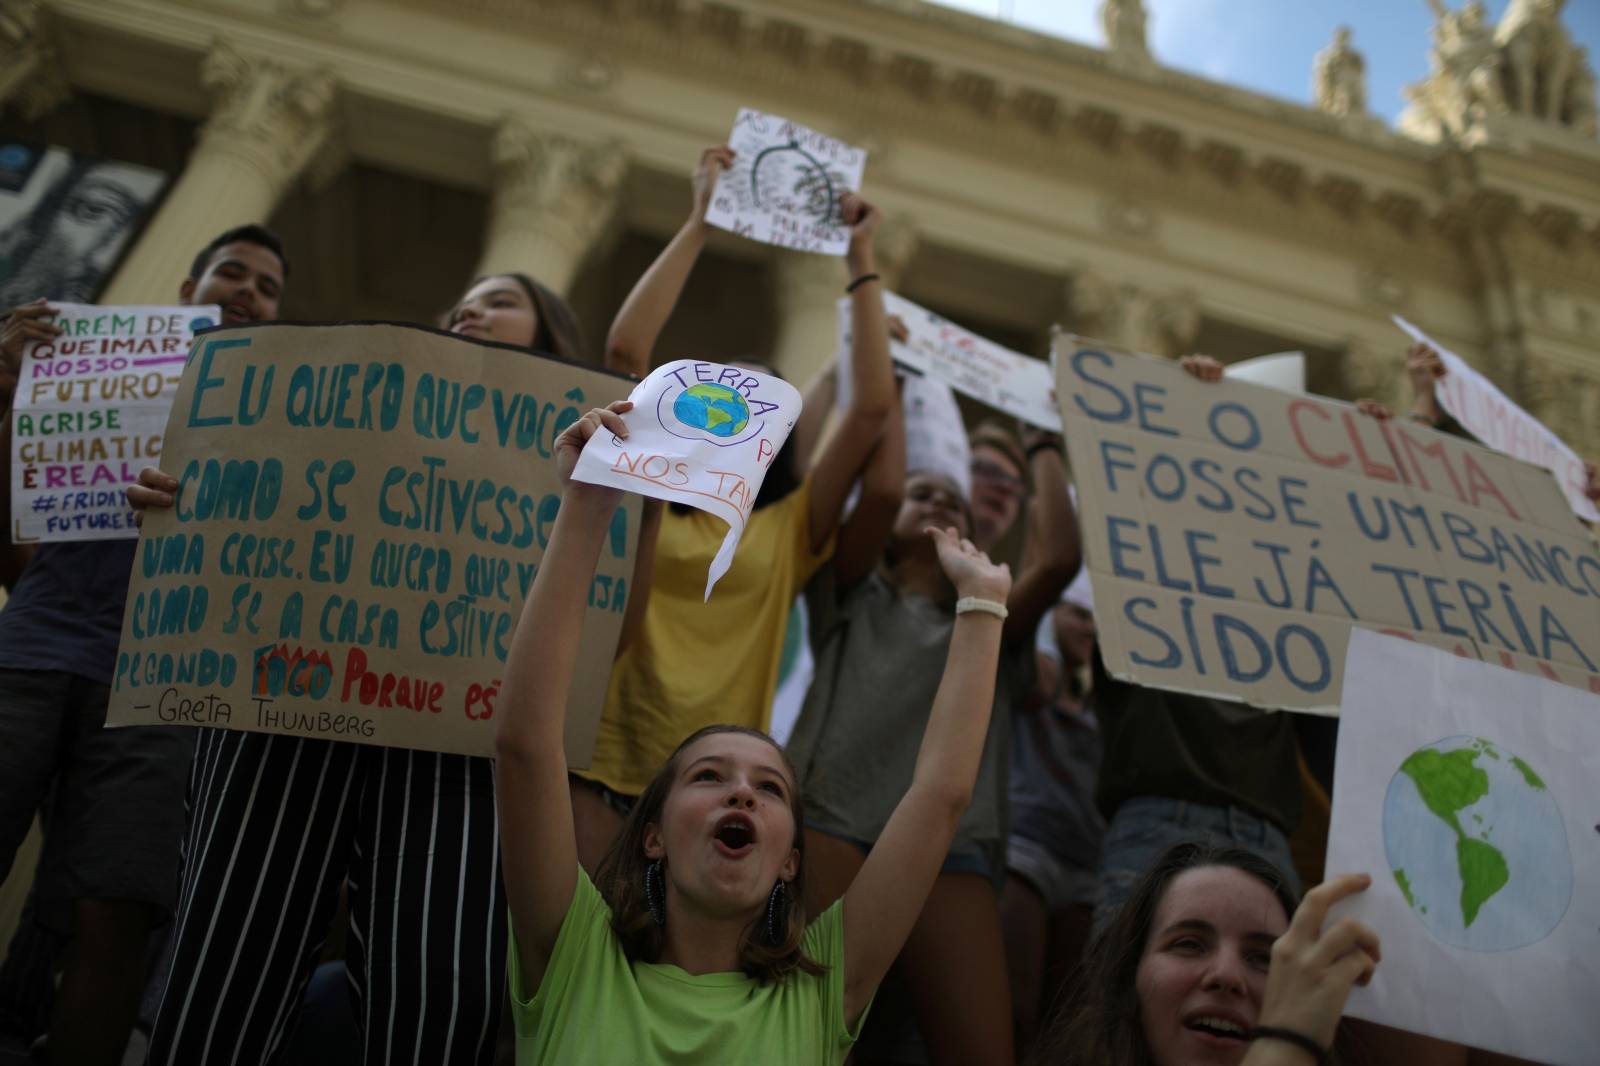 Demonstrators take part in the world march for climate change and the environment, called by the organization Fridays for Future outside the Rio de Janeiro State Assembly